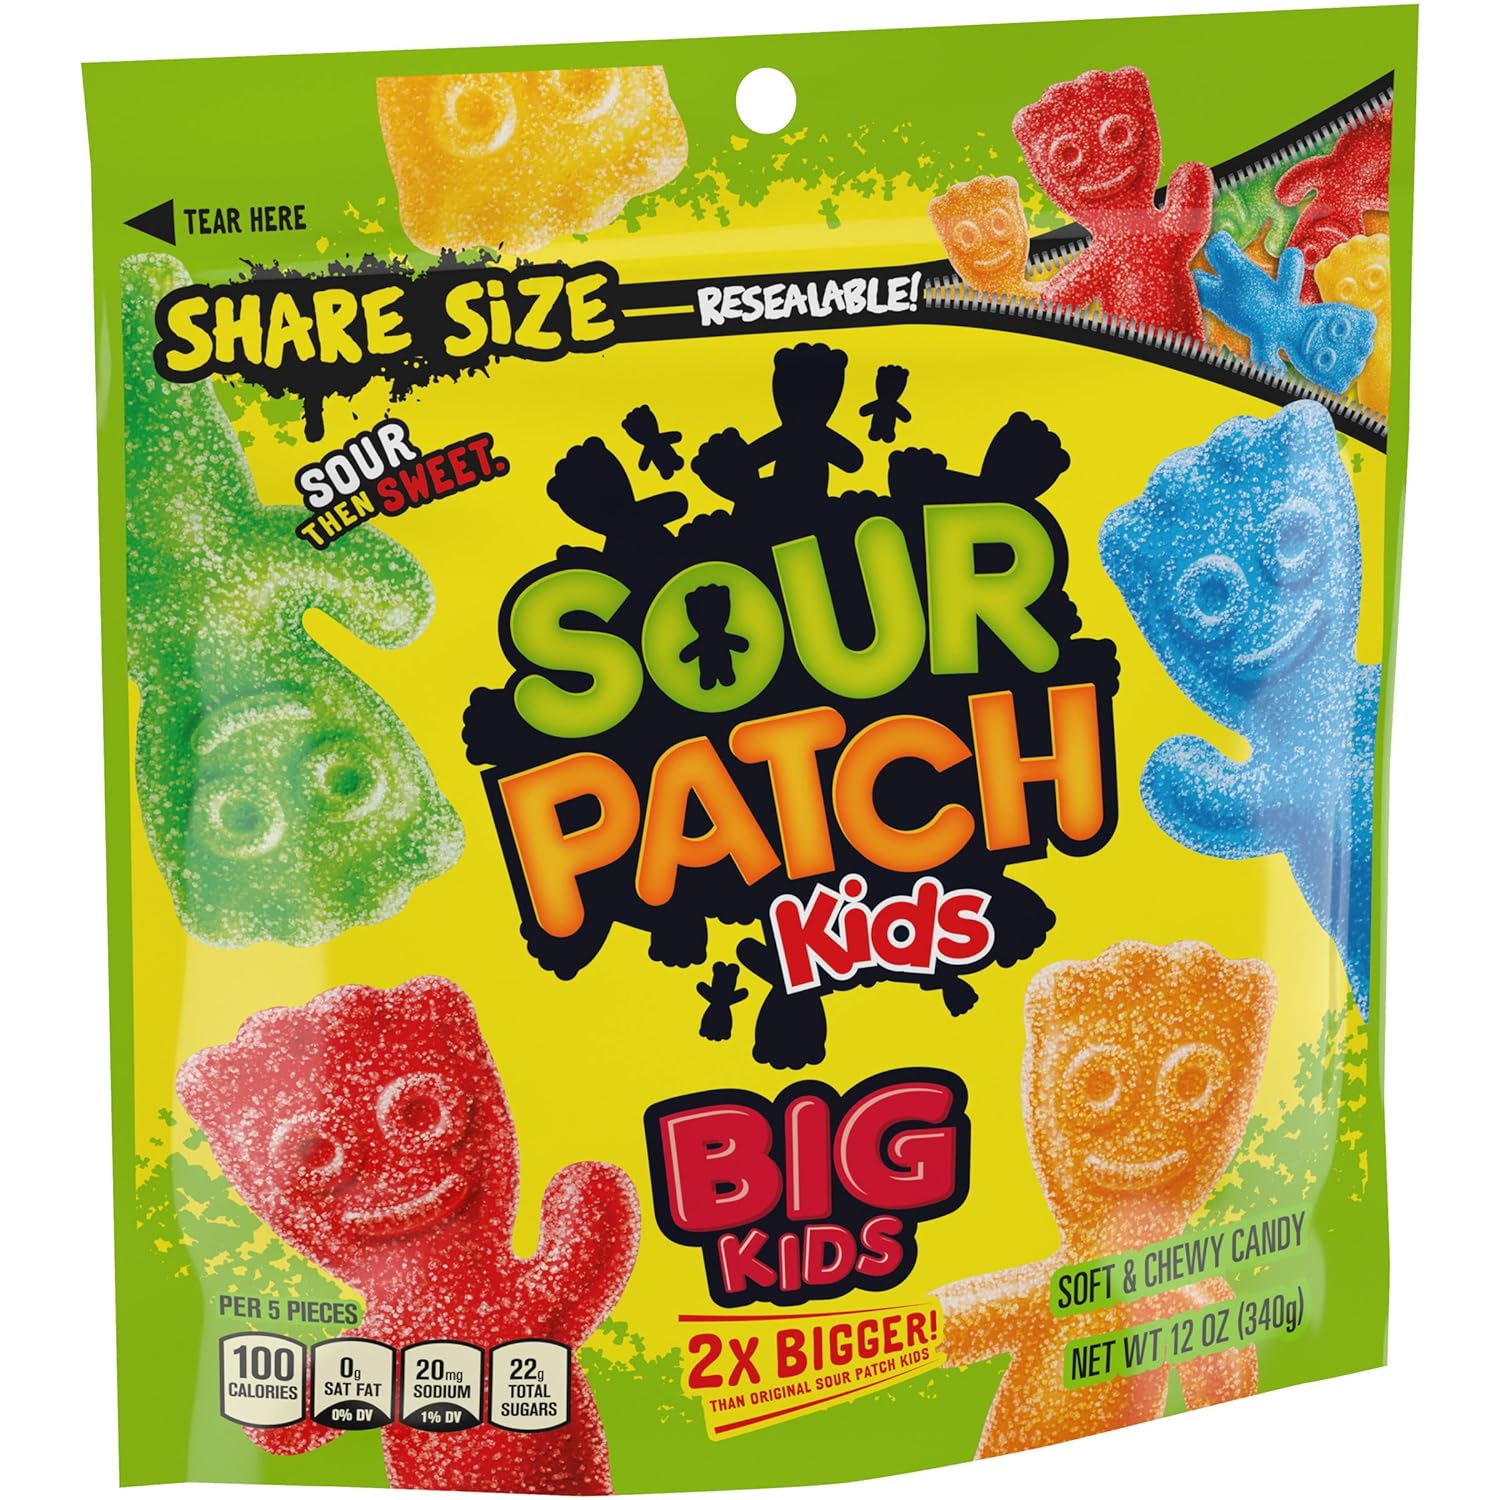 SOUR PATCH KIDS Big Kids Soft & Chewy Candy, Share Size, 12 oz